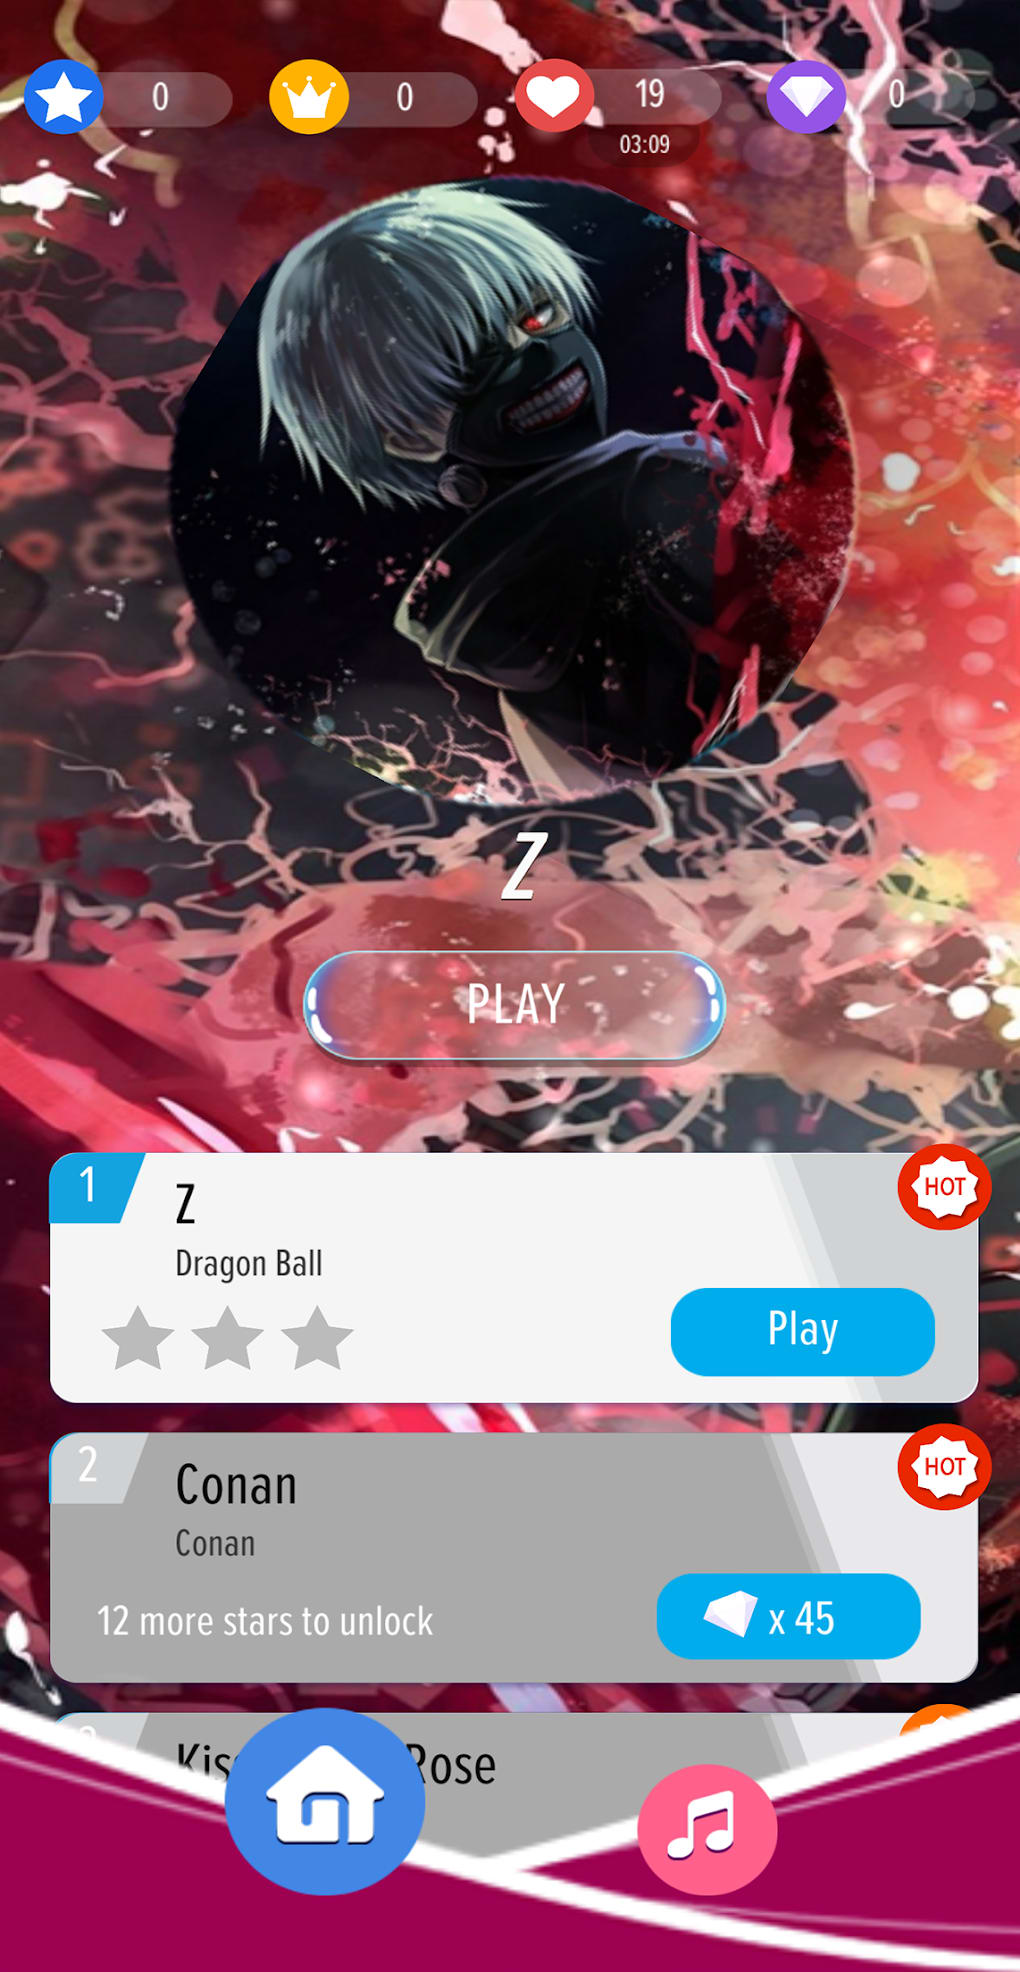 Anime Tap : Piano Songs para Android - Download